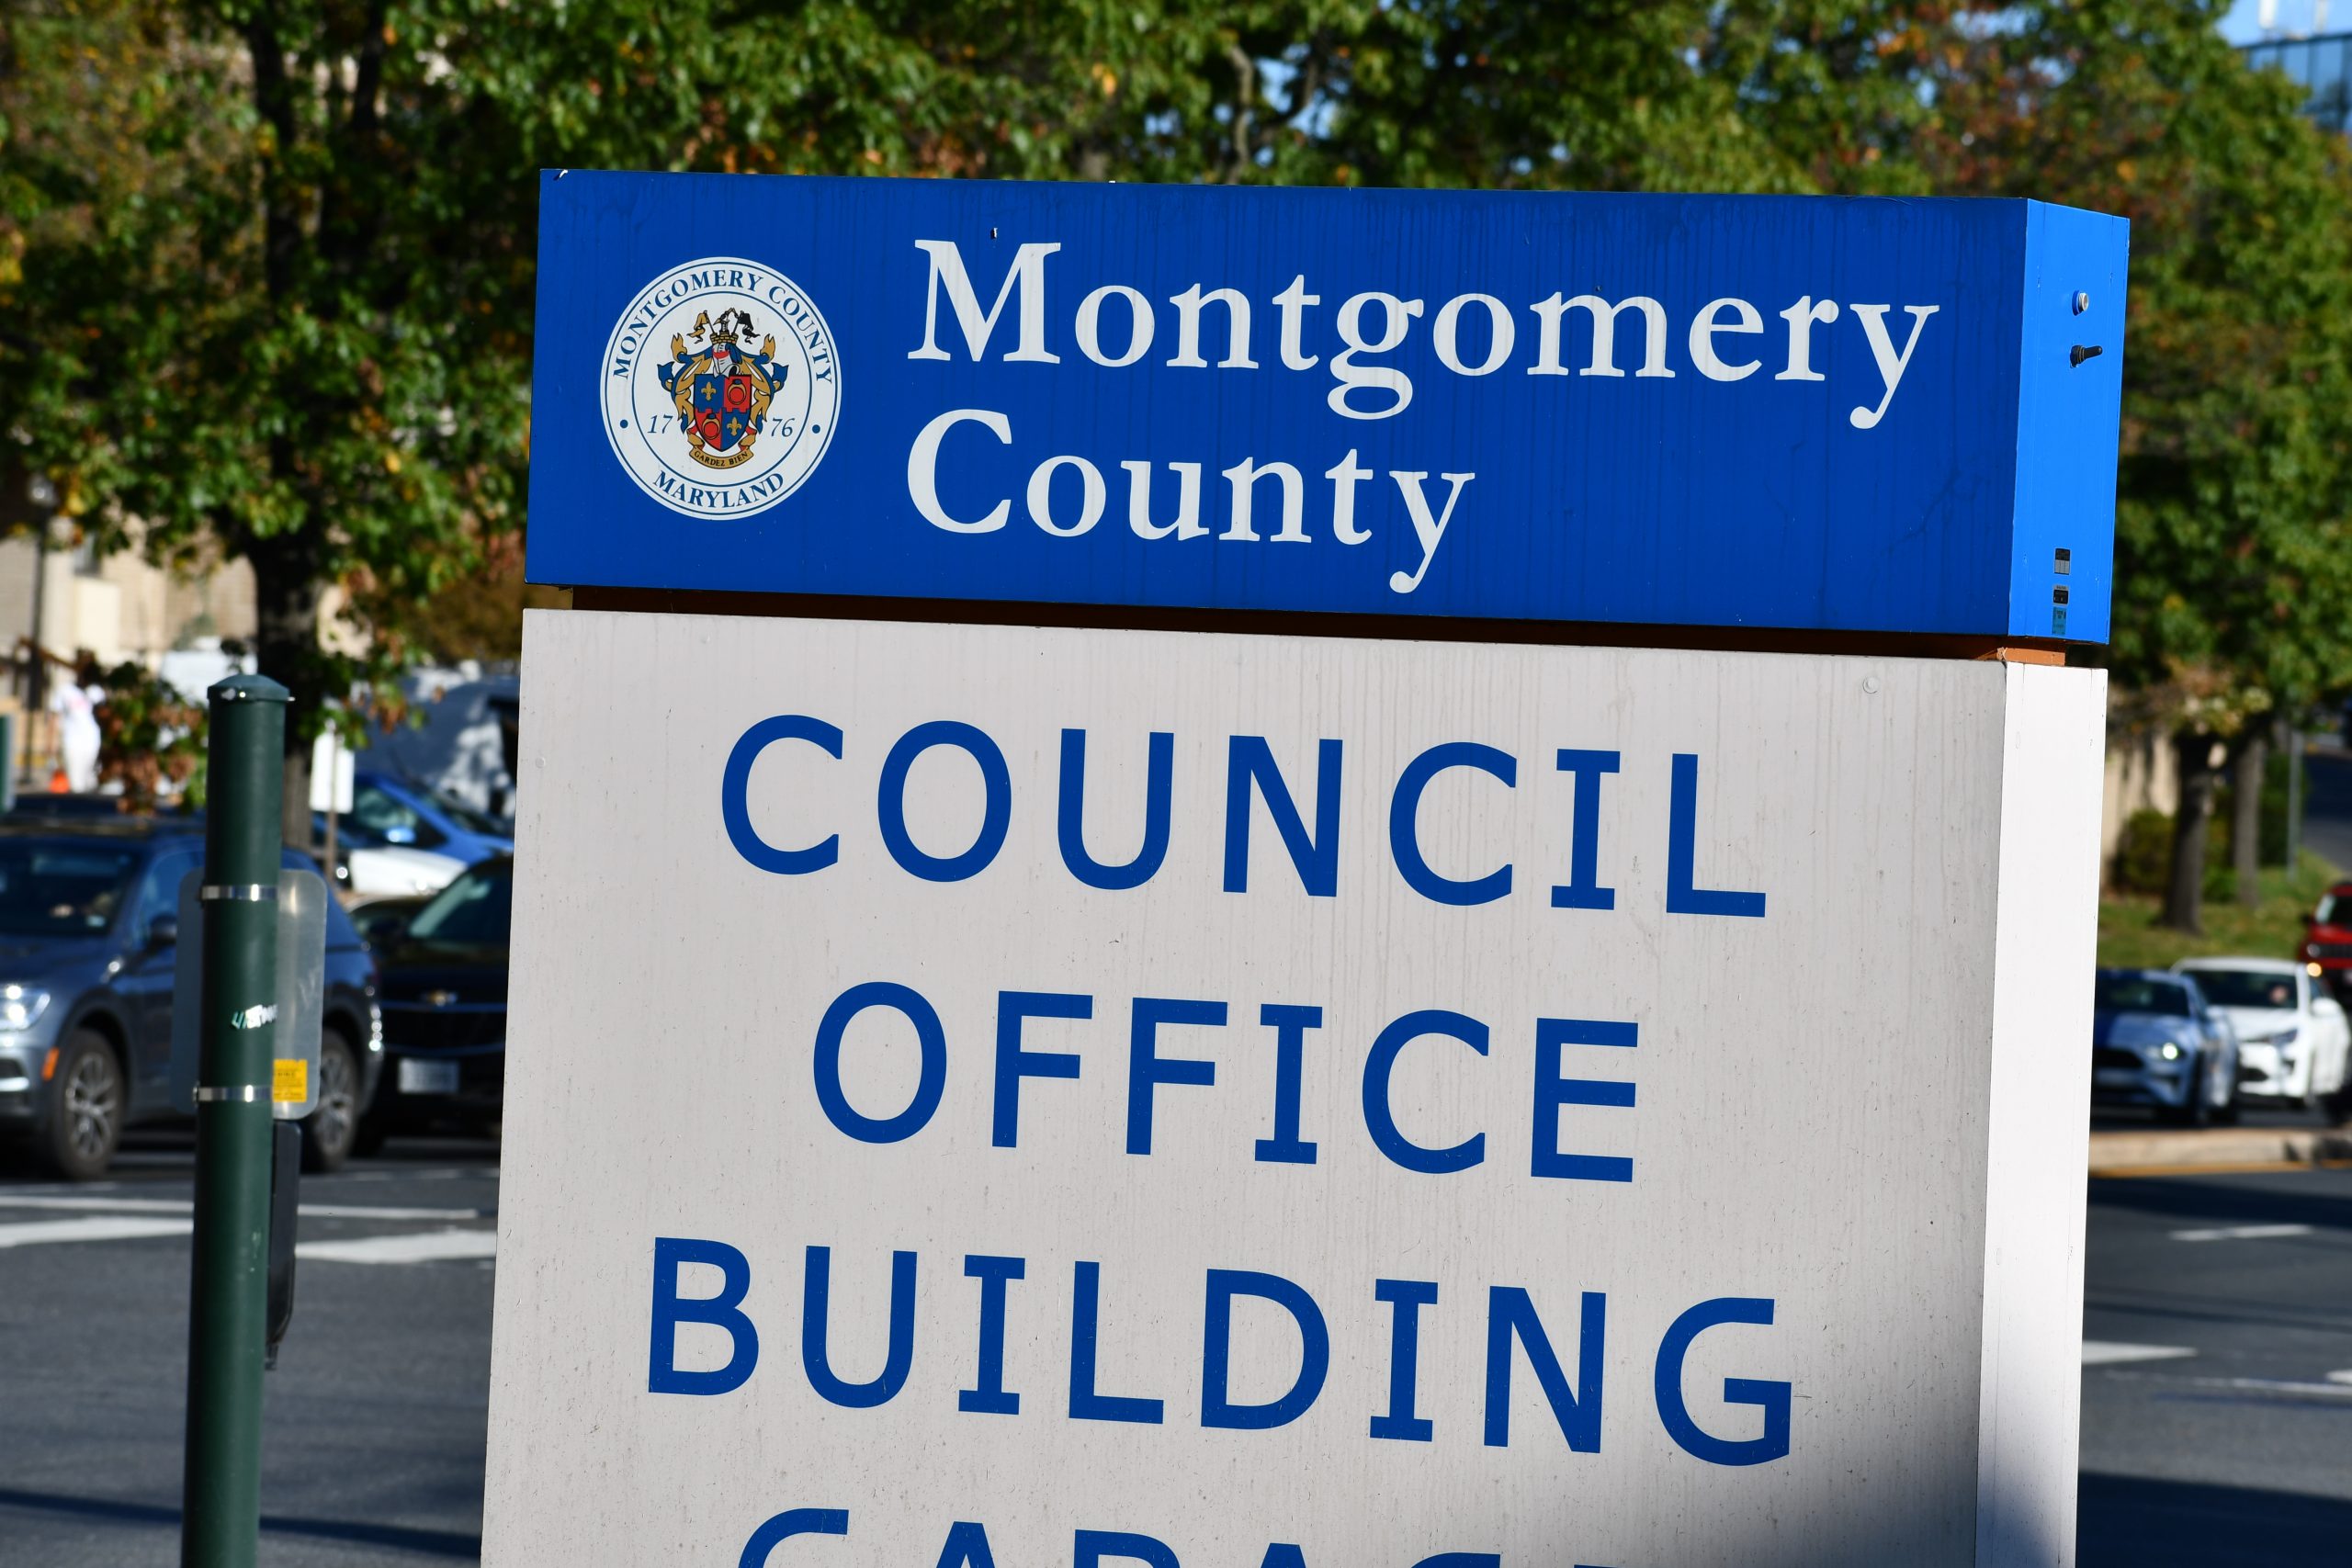 Signage for Montgomery County's Council Office Building